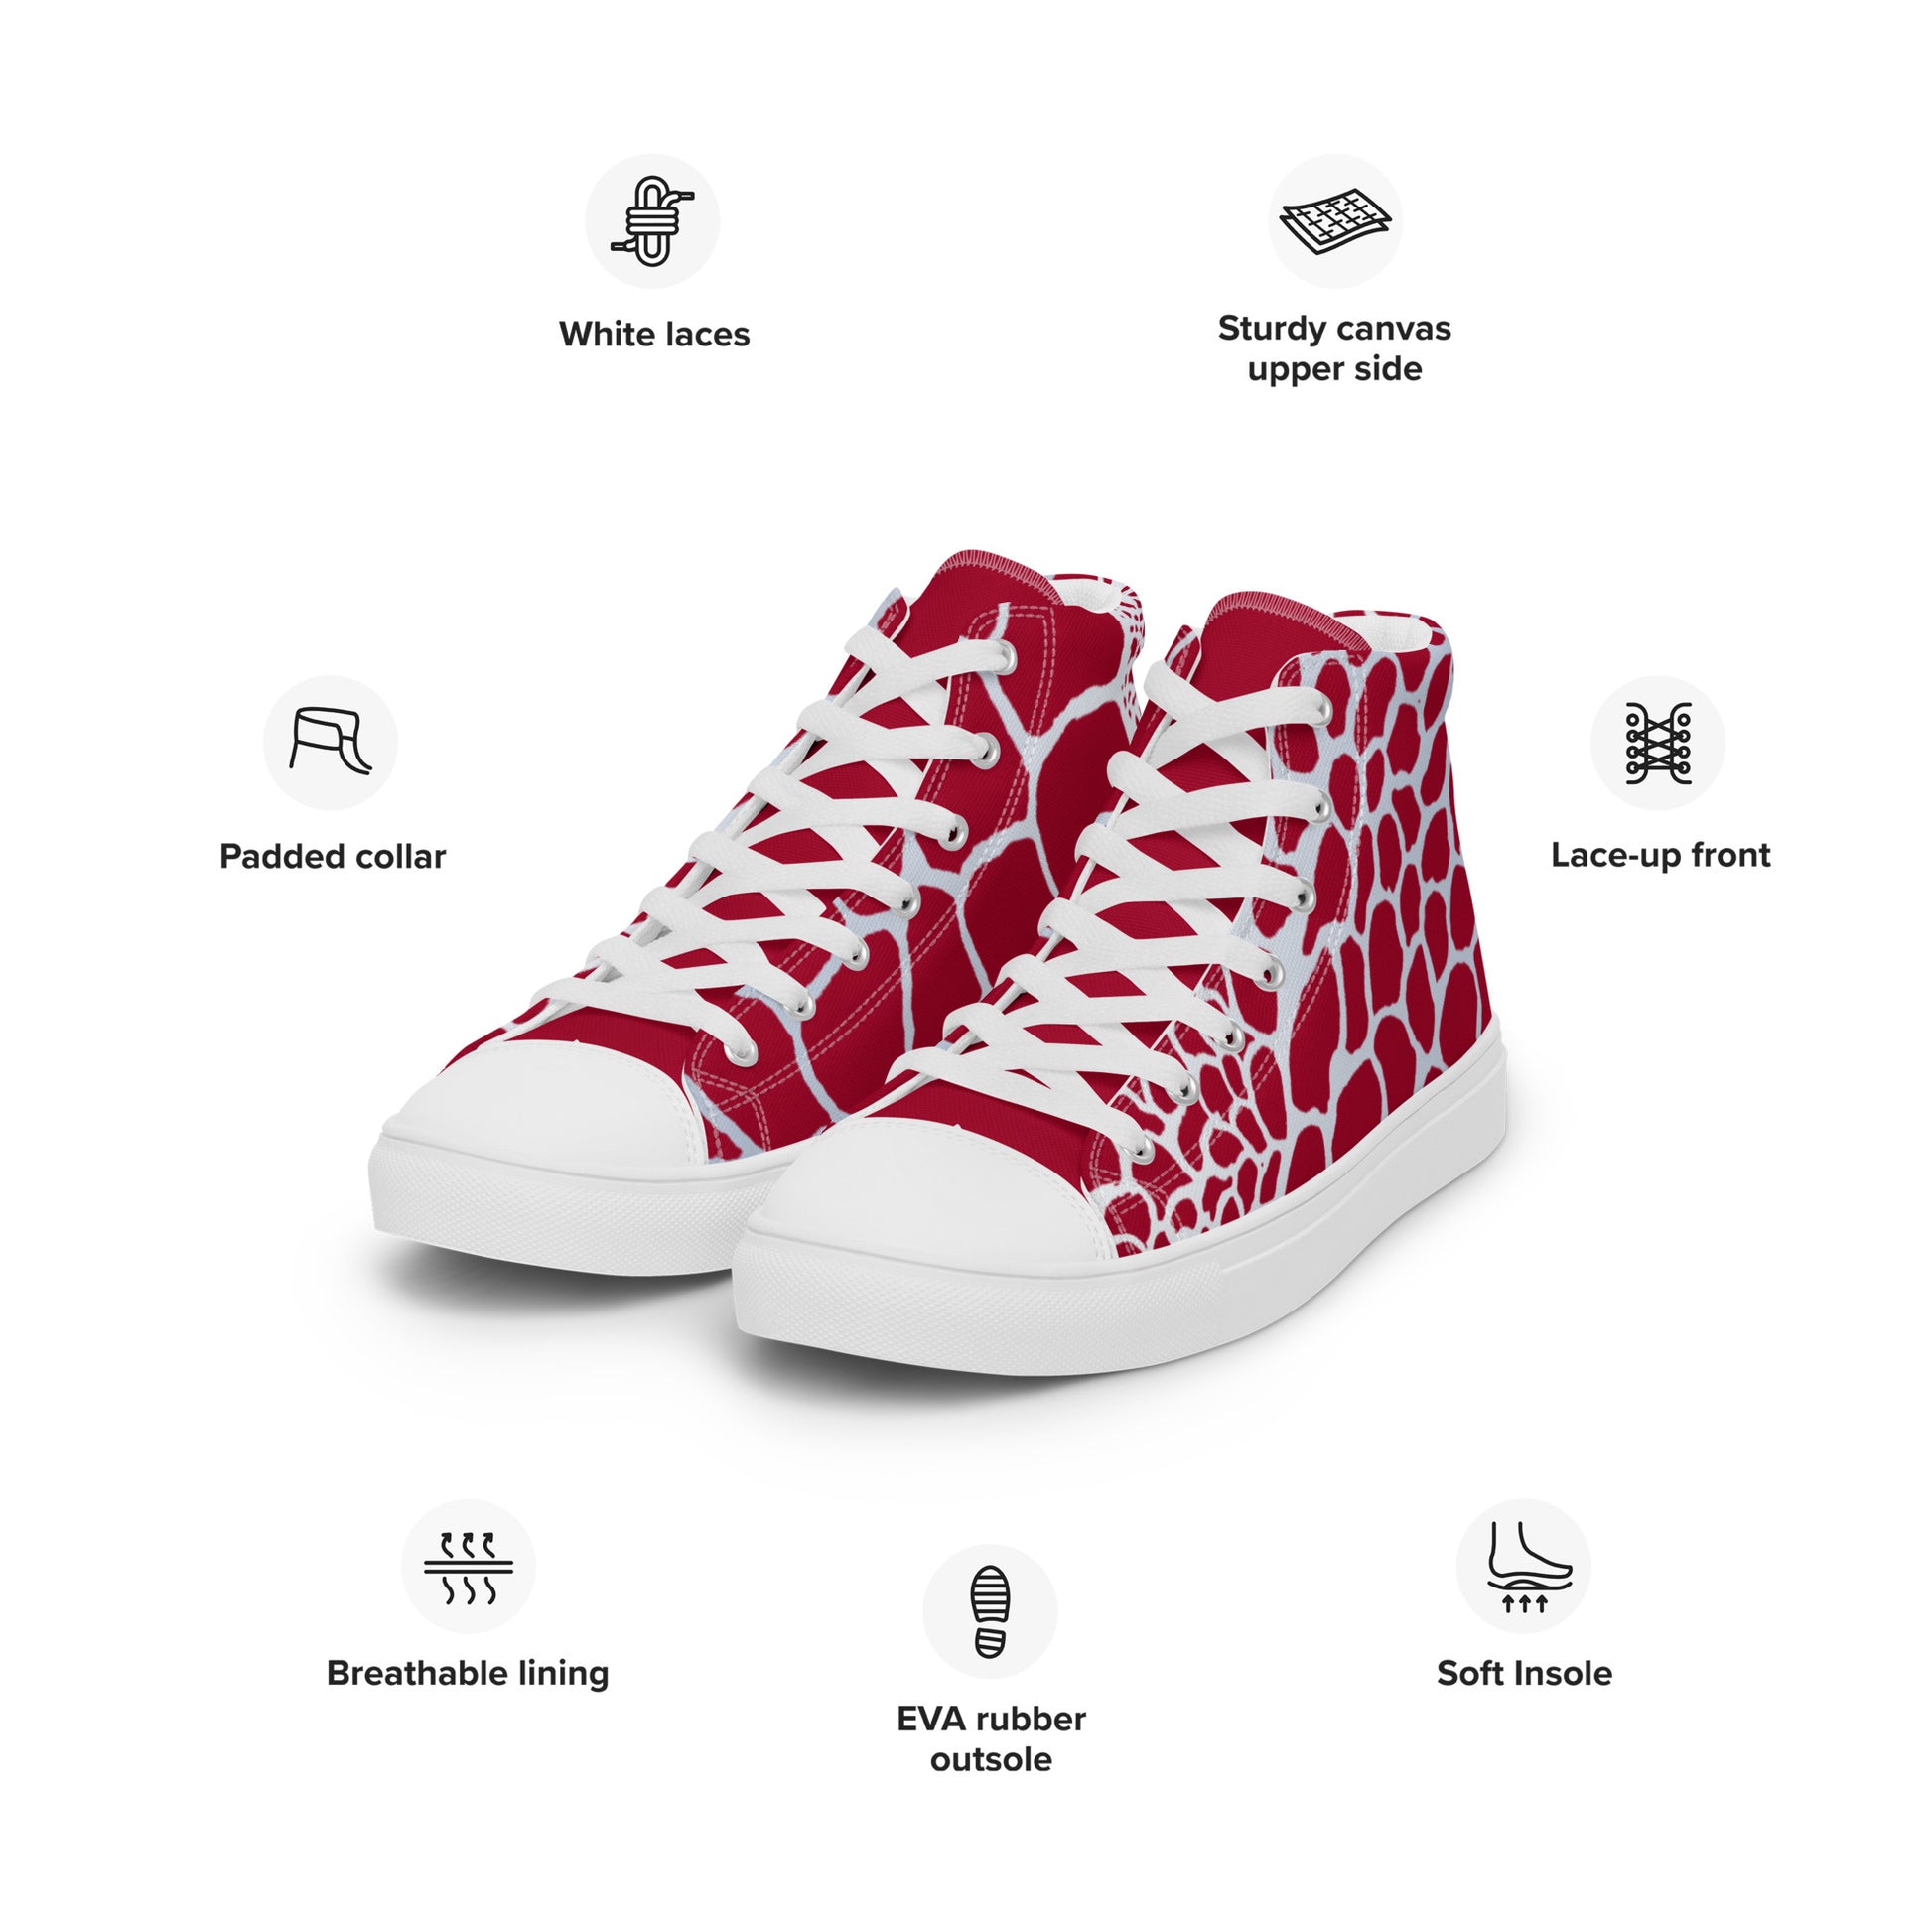 Organic Men’s High Top Canvas Shoes (Red & White) | Comfortable Print Shoes | Stylish Festival Sneakers | Comfortable Culture - Comfortable Culture - Shoes - Comfortable Culture